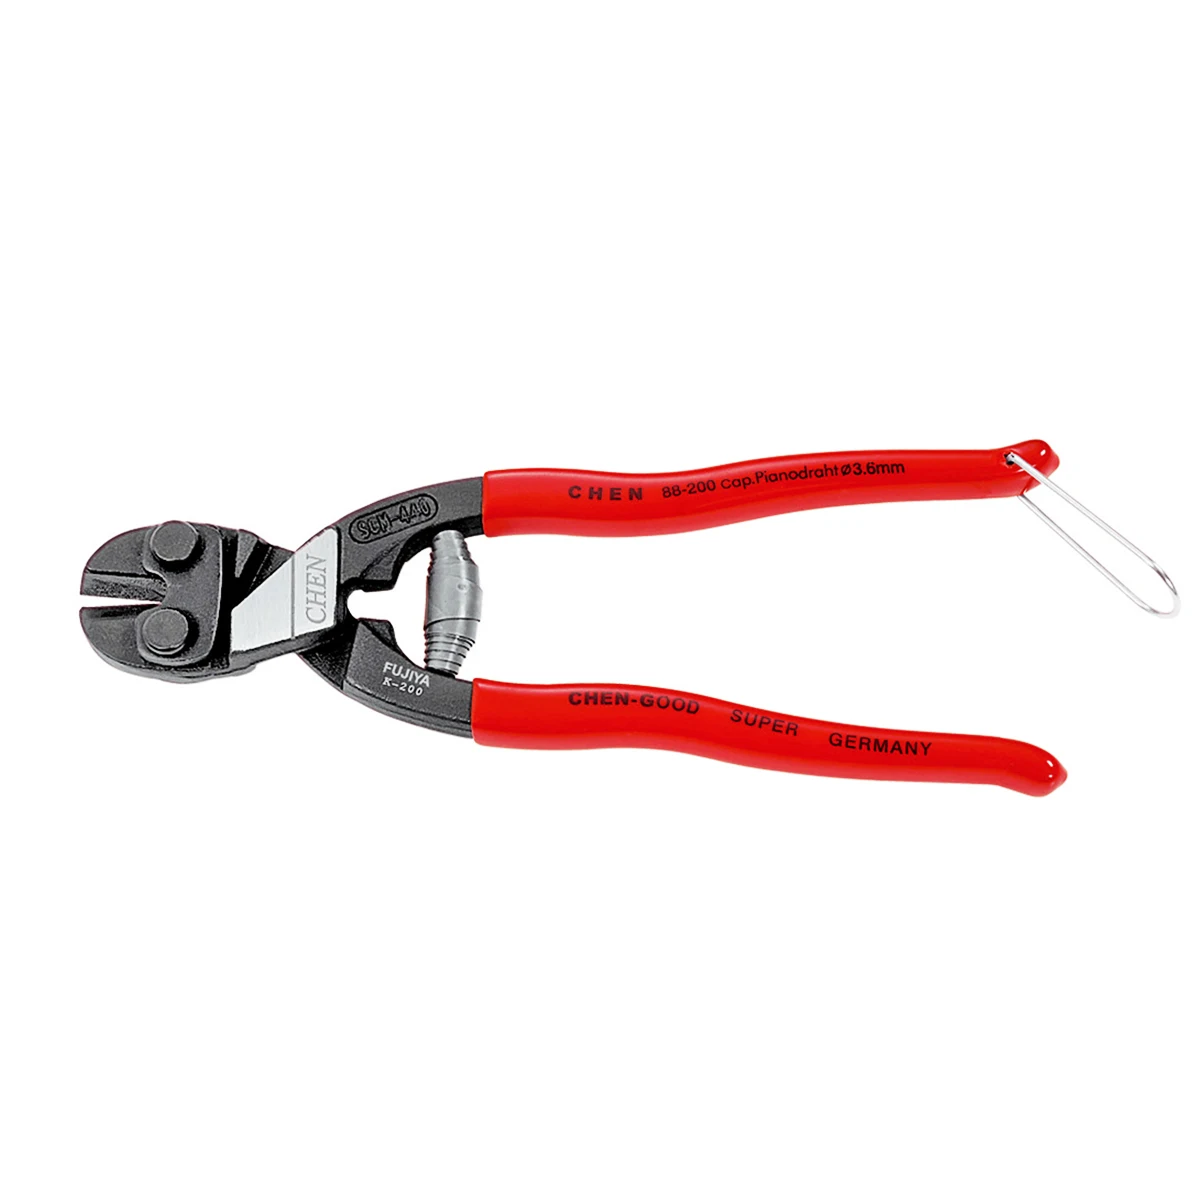 Construction Building Industry Mini Bolt Cutter for Architect l High Leverage l CR-MO alloy steel l Safety lock device l Effort